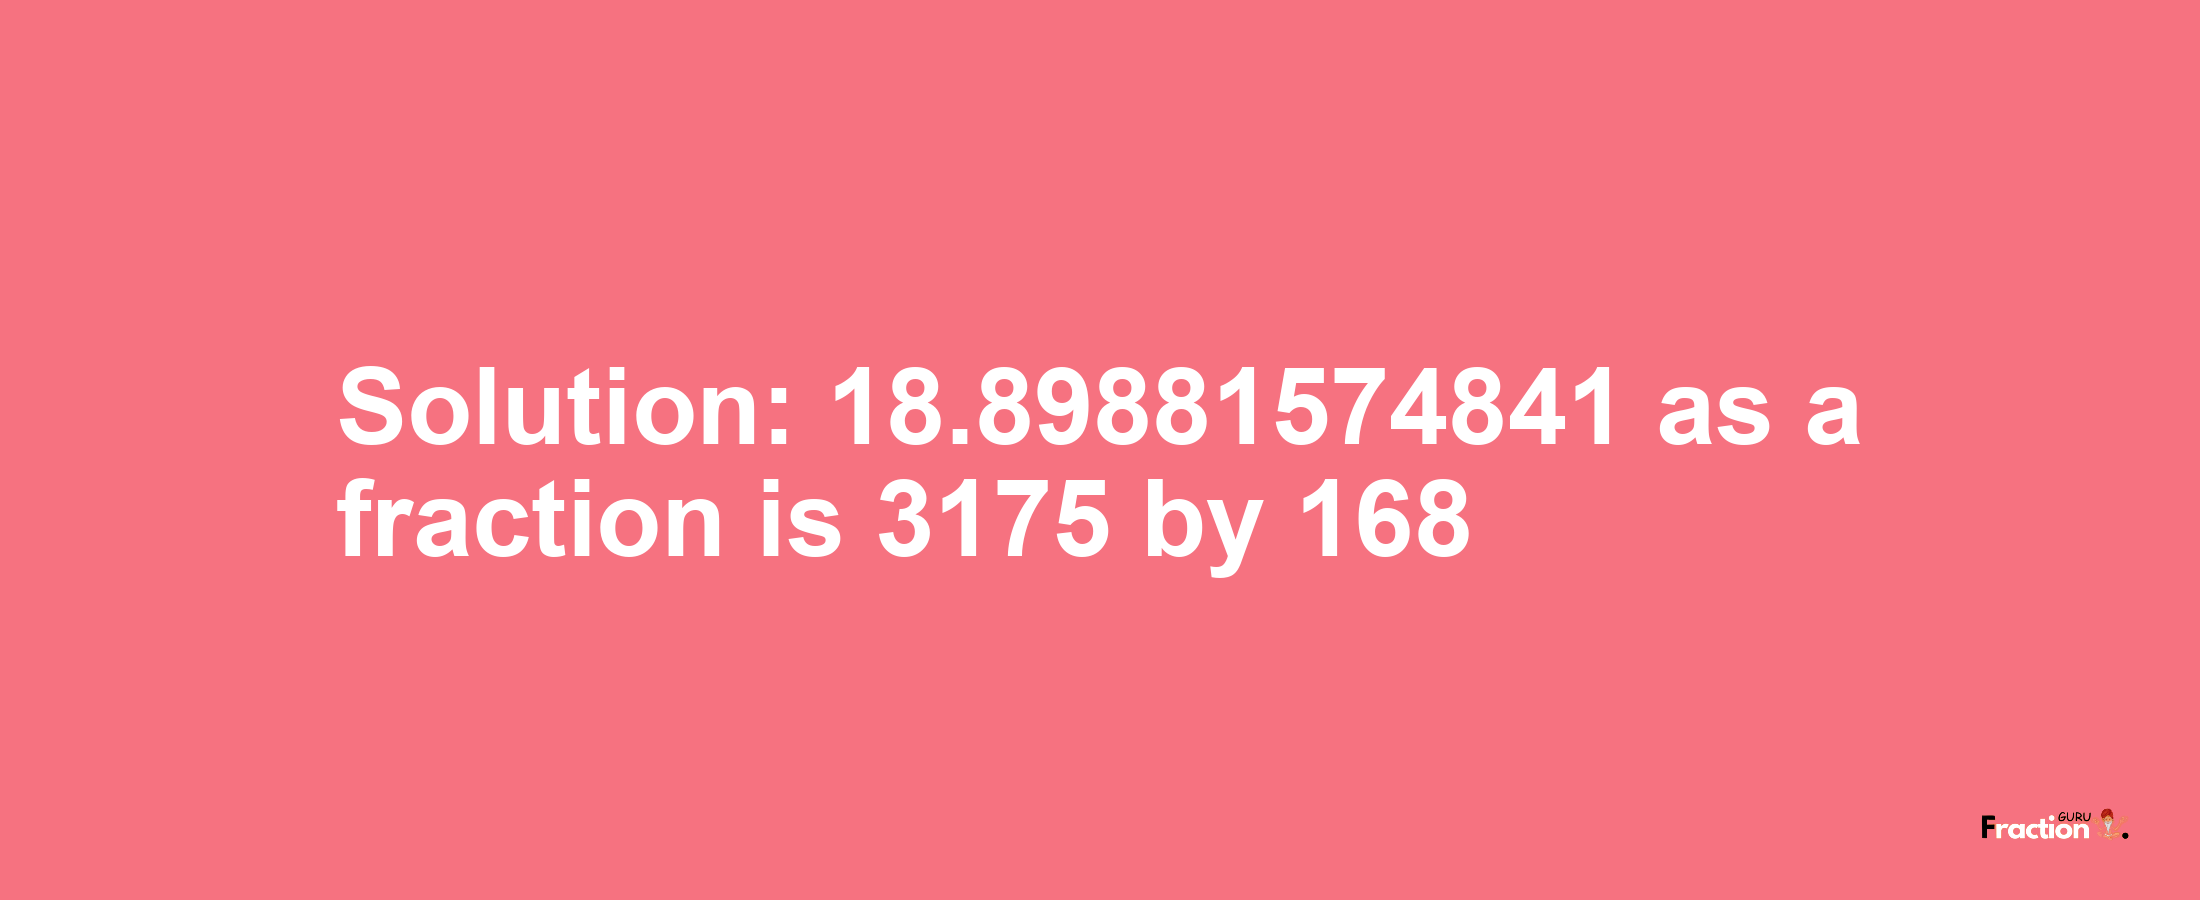 Solution:18.89881574841 as a fraction is 3175/168